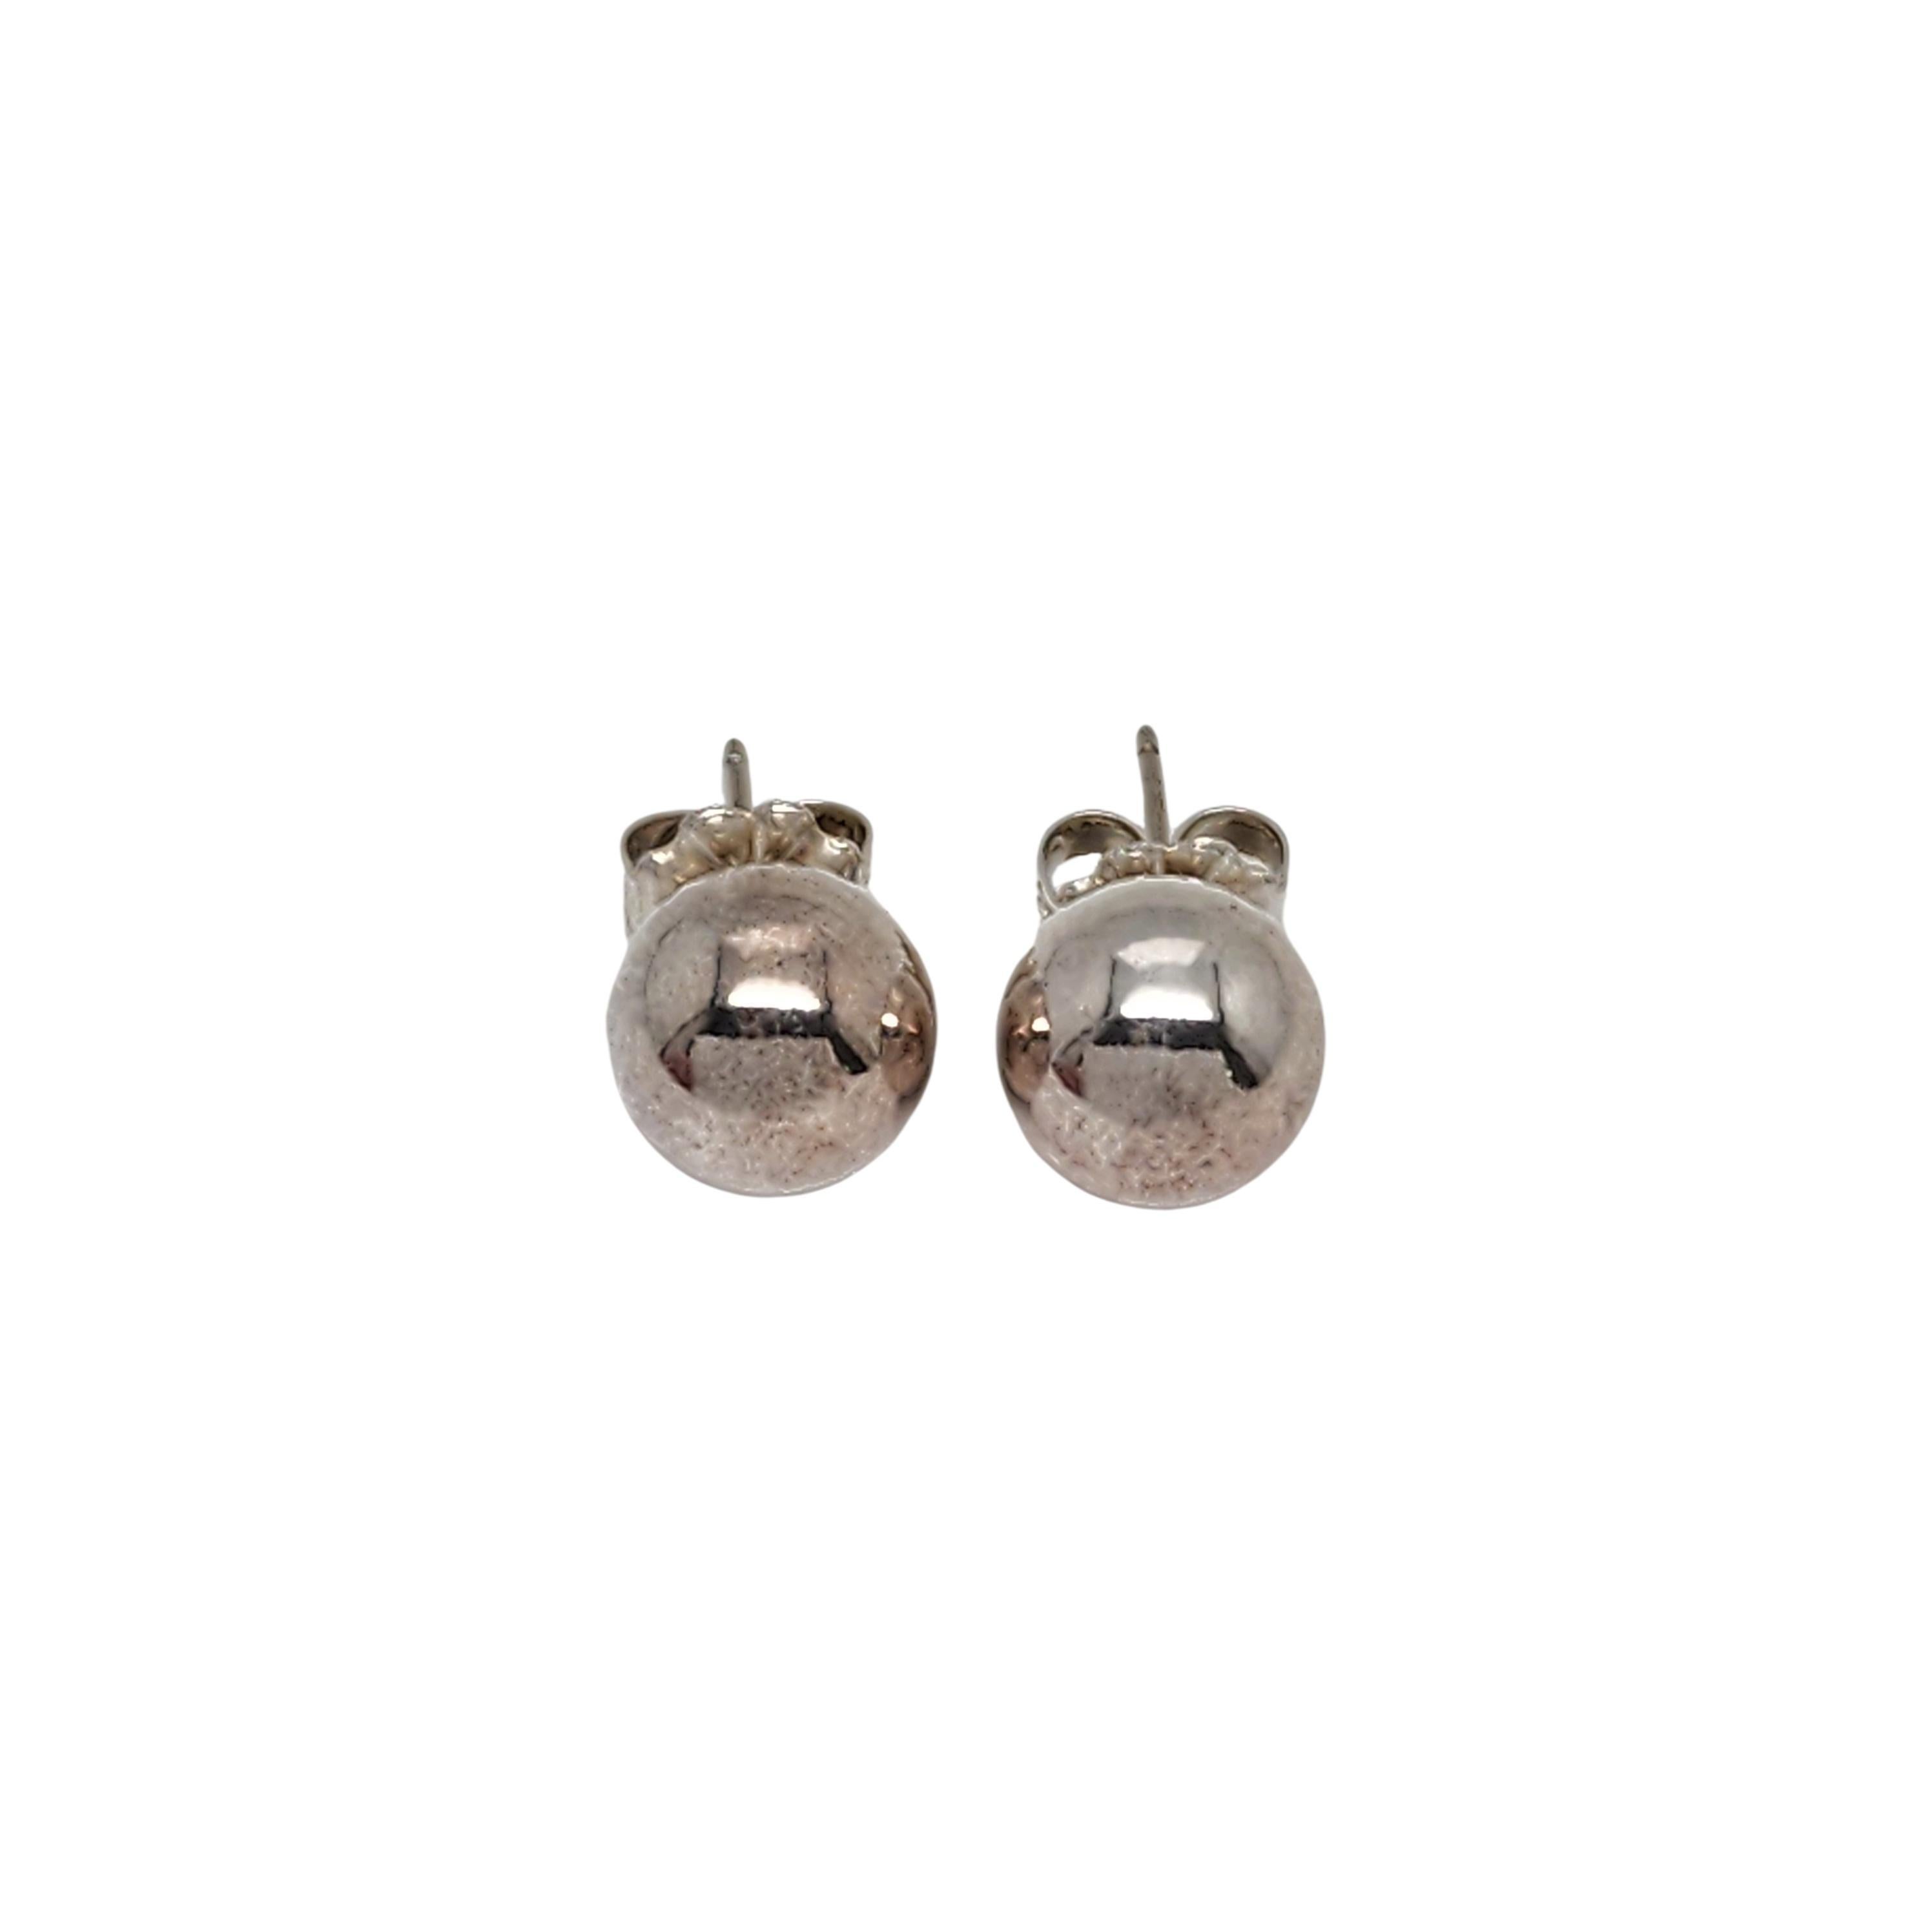 Tiffany & Co sterling silver ball stud earrings 

Authentic Tiffany earrings featuring a classic ball design. The sterling silver earring backs are NOT Tiffany & Co. Tiffany pouch and box are not included.

Measures approx 10mm in diameter.

Weighs